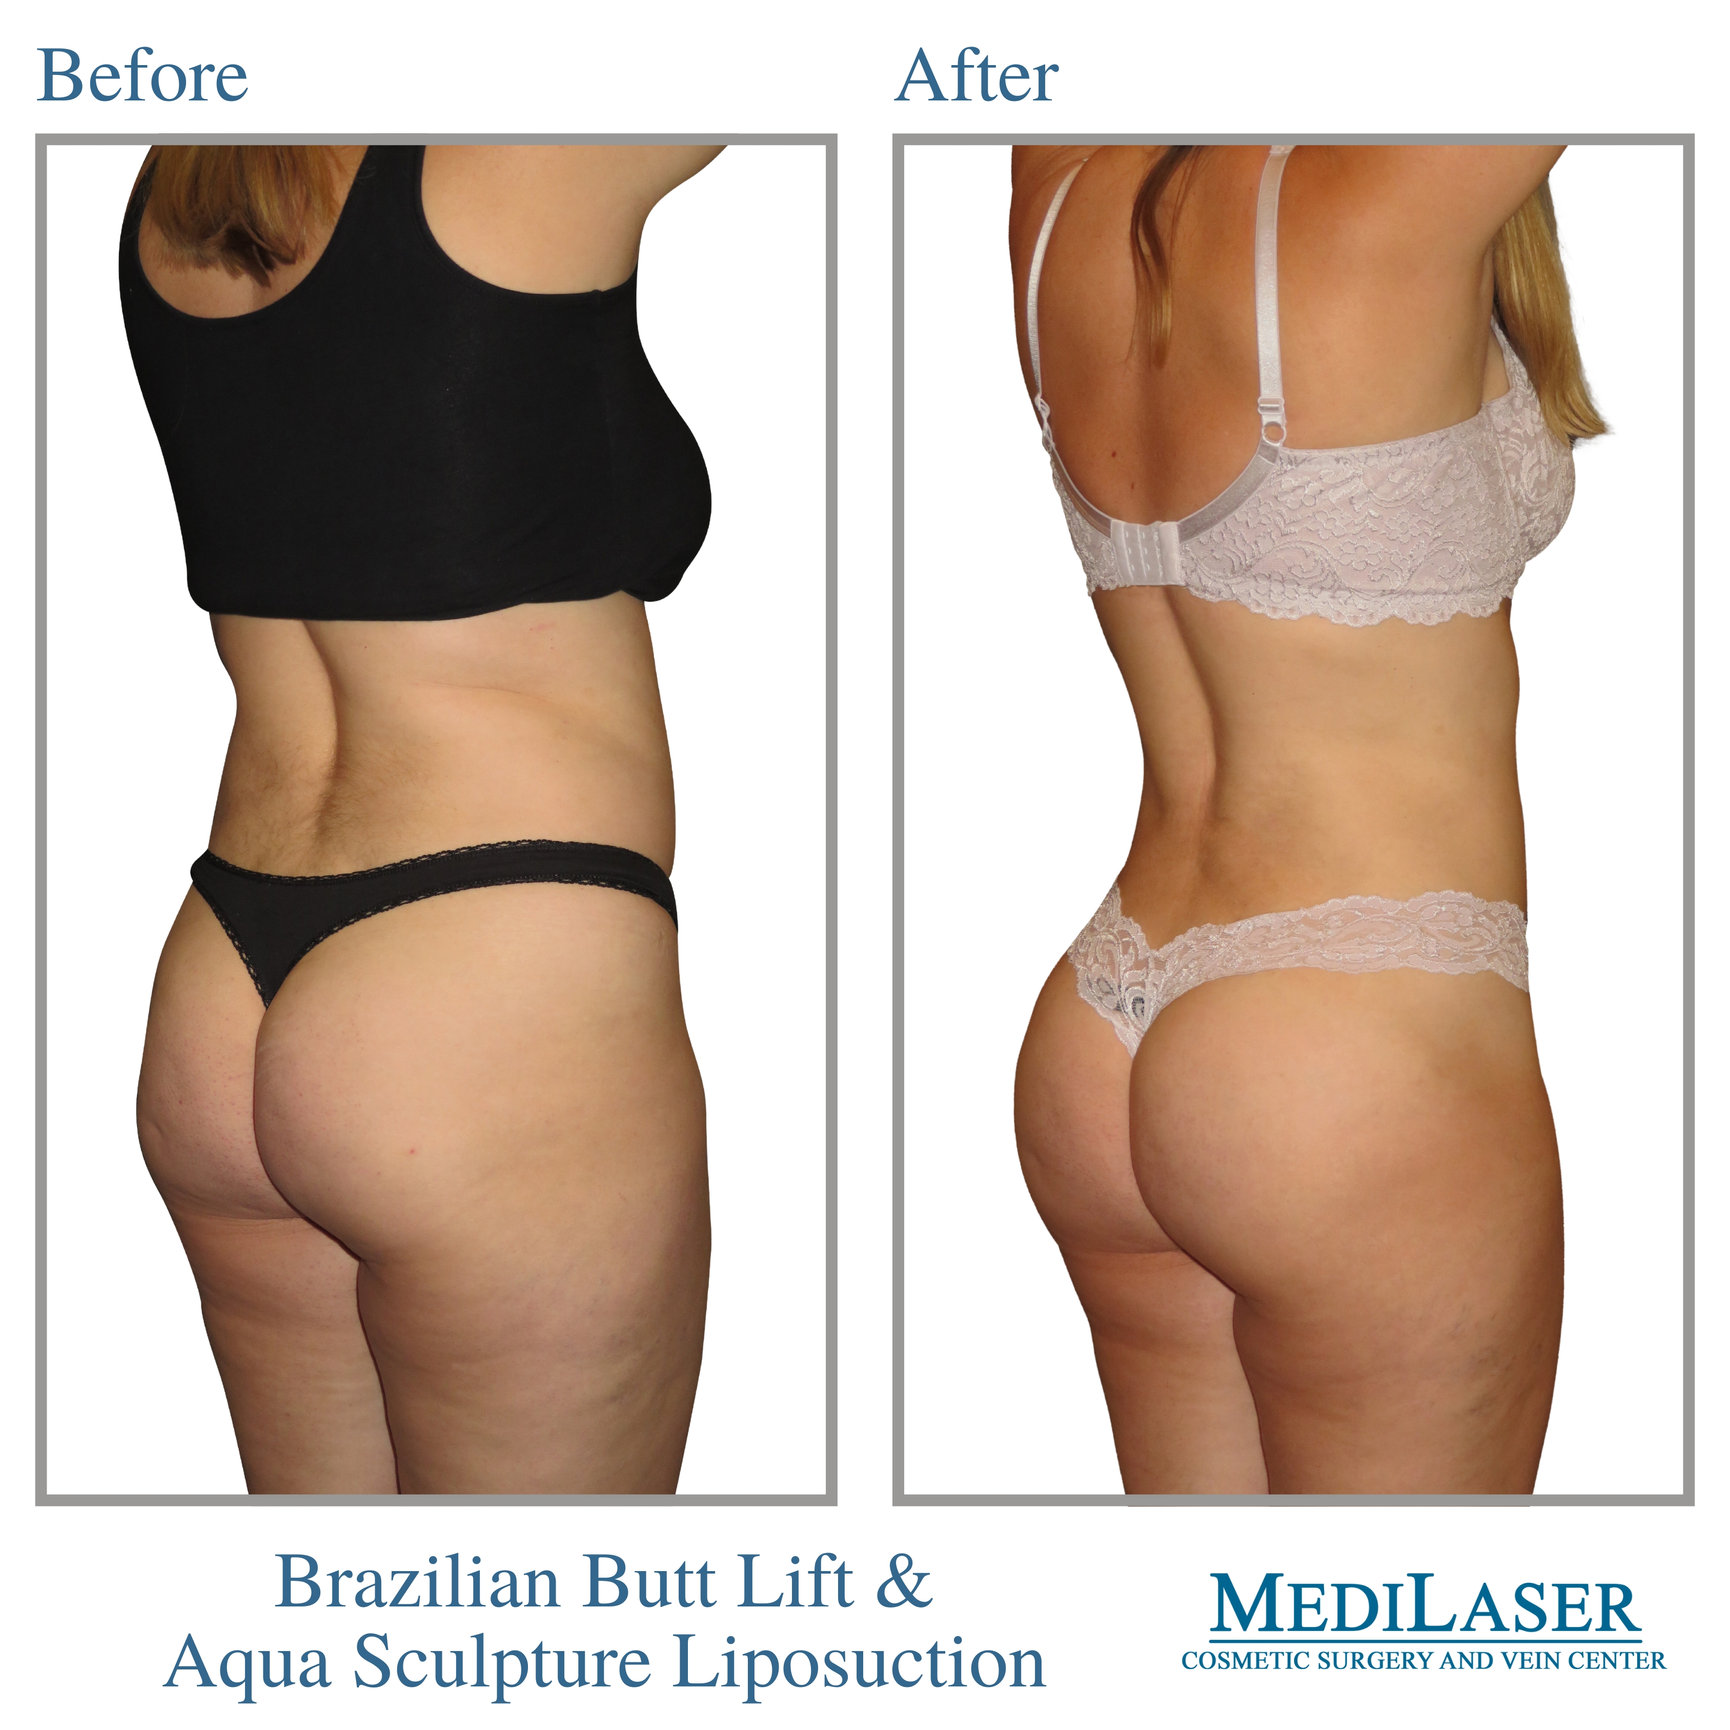 Tummy Tuck Before and After - Medilaser Surgery and Vein Center